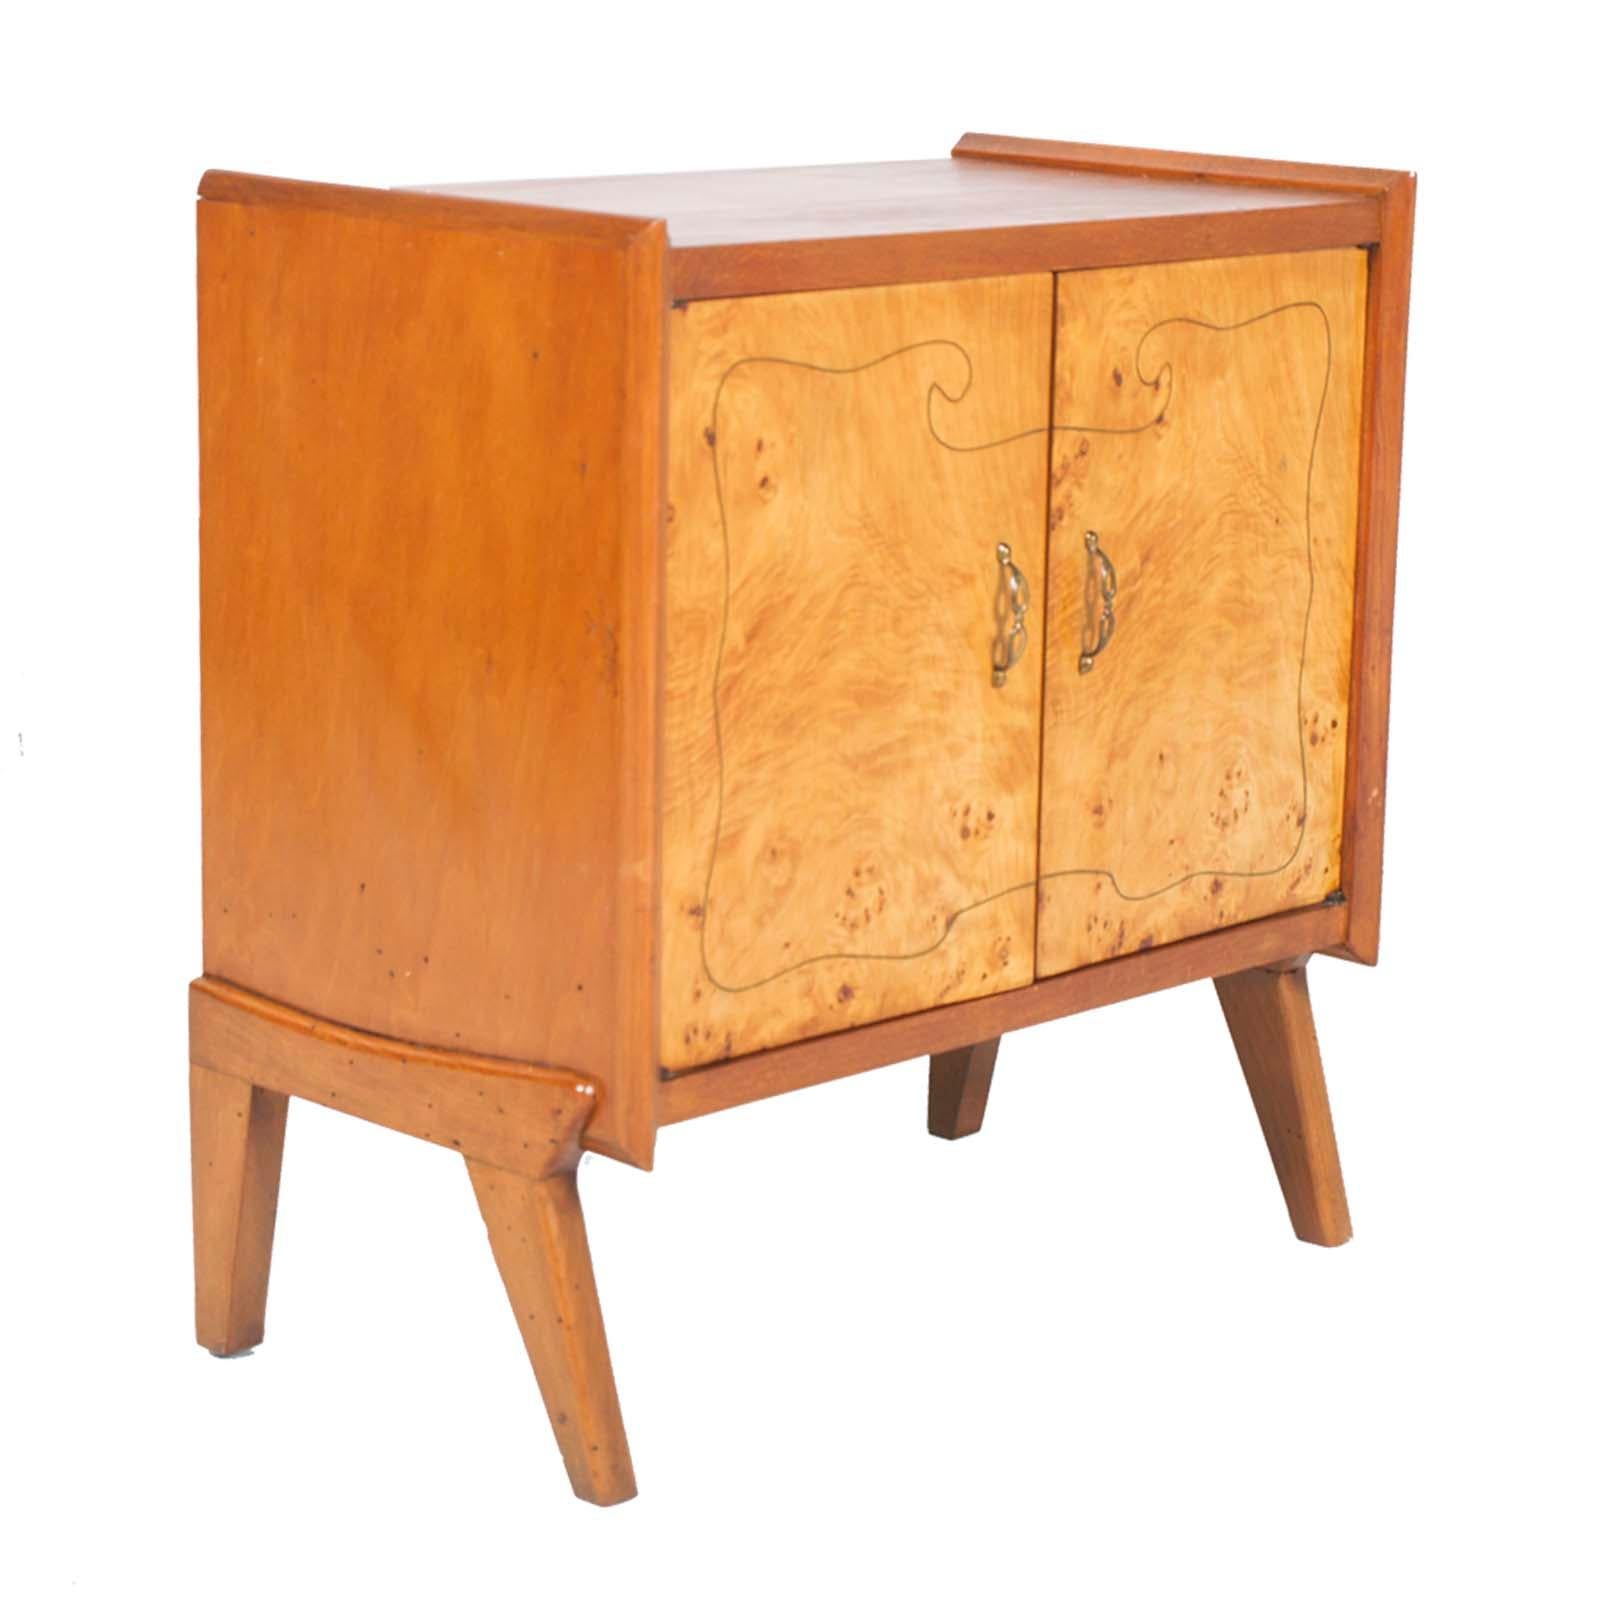 Beautiful Mid-Century Modern small cabinet from Esposizione Mobili Cantù , by Paolo Buffa, period 1940s years, in blond walnut and two doors in burr birch inlay threaded. Original vintage handles.

Measure cm: H 60 W 57 D 32.